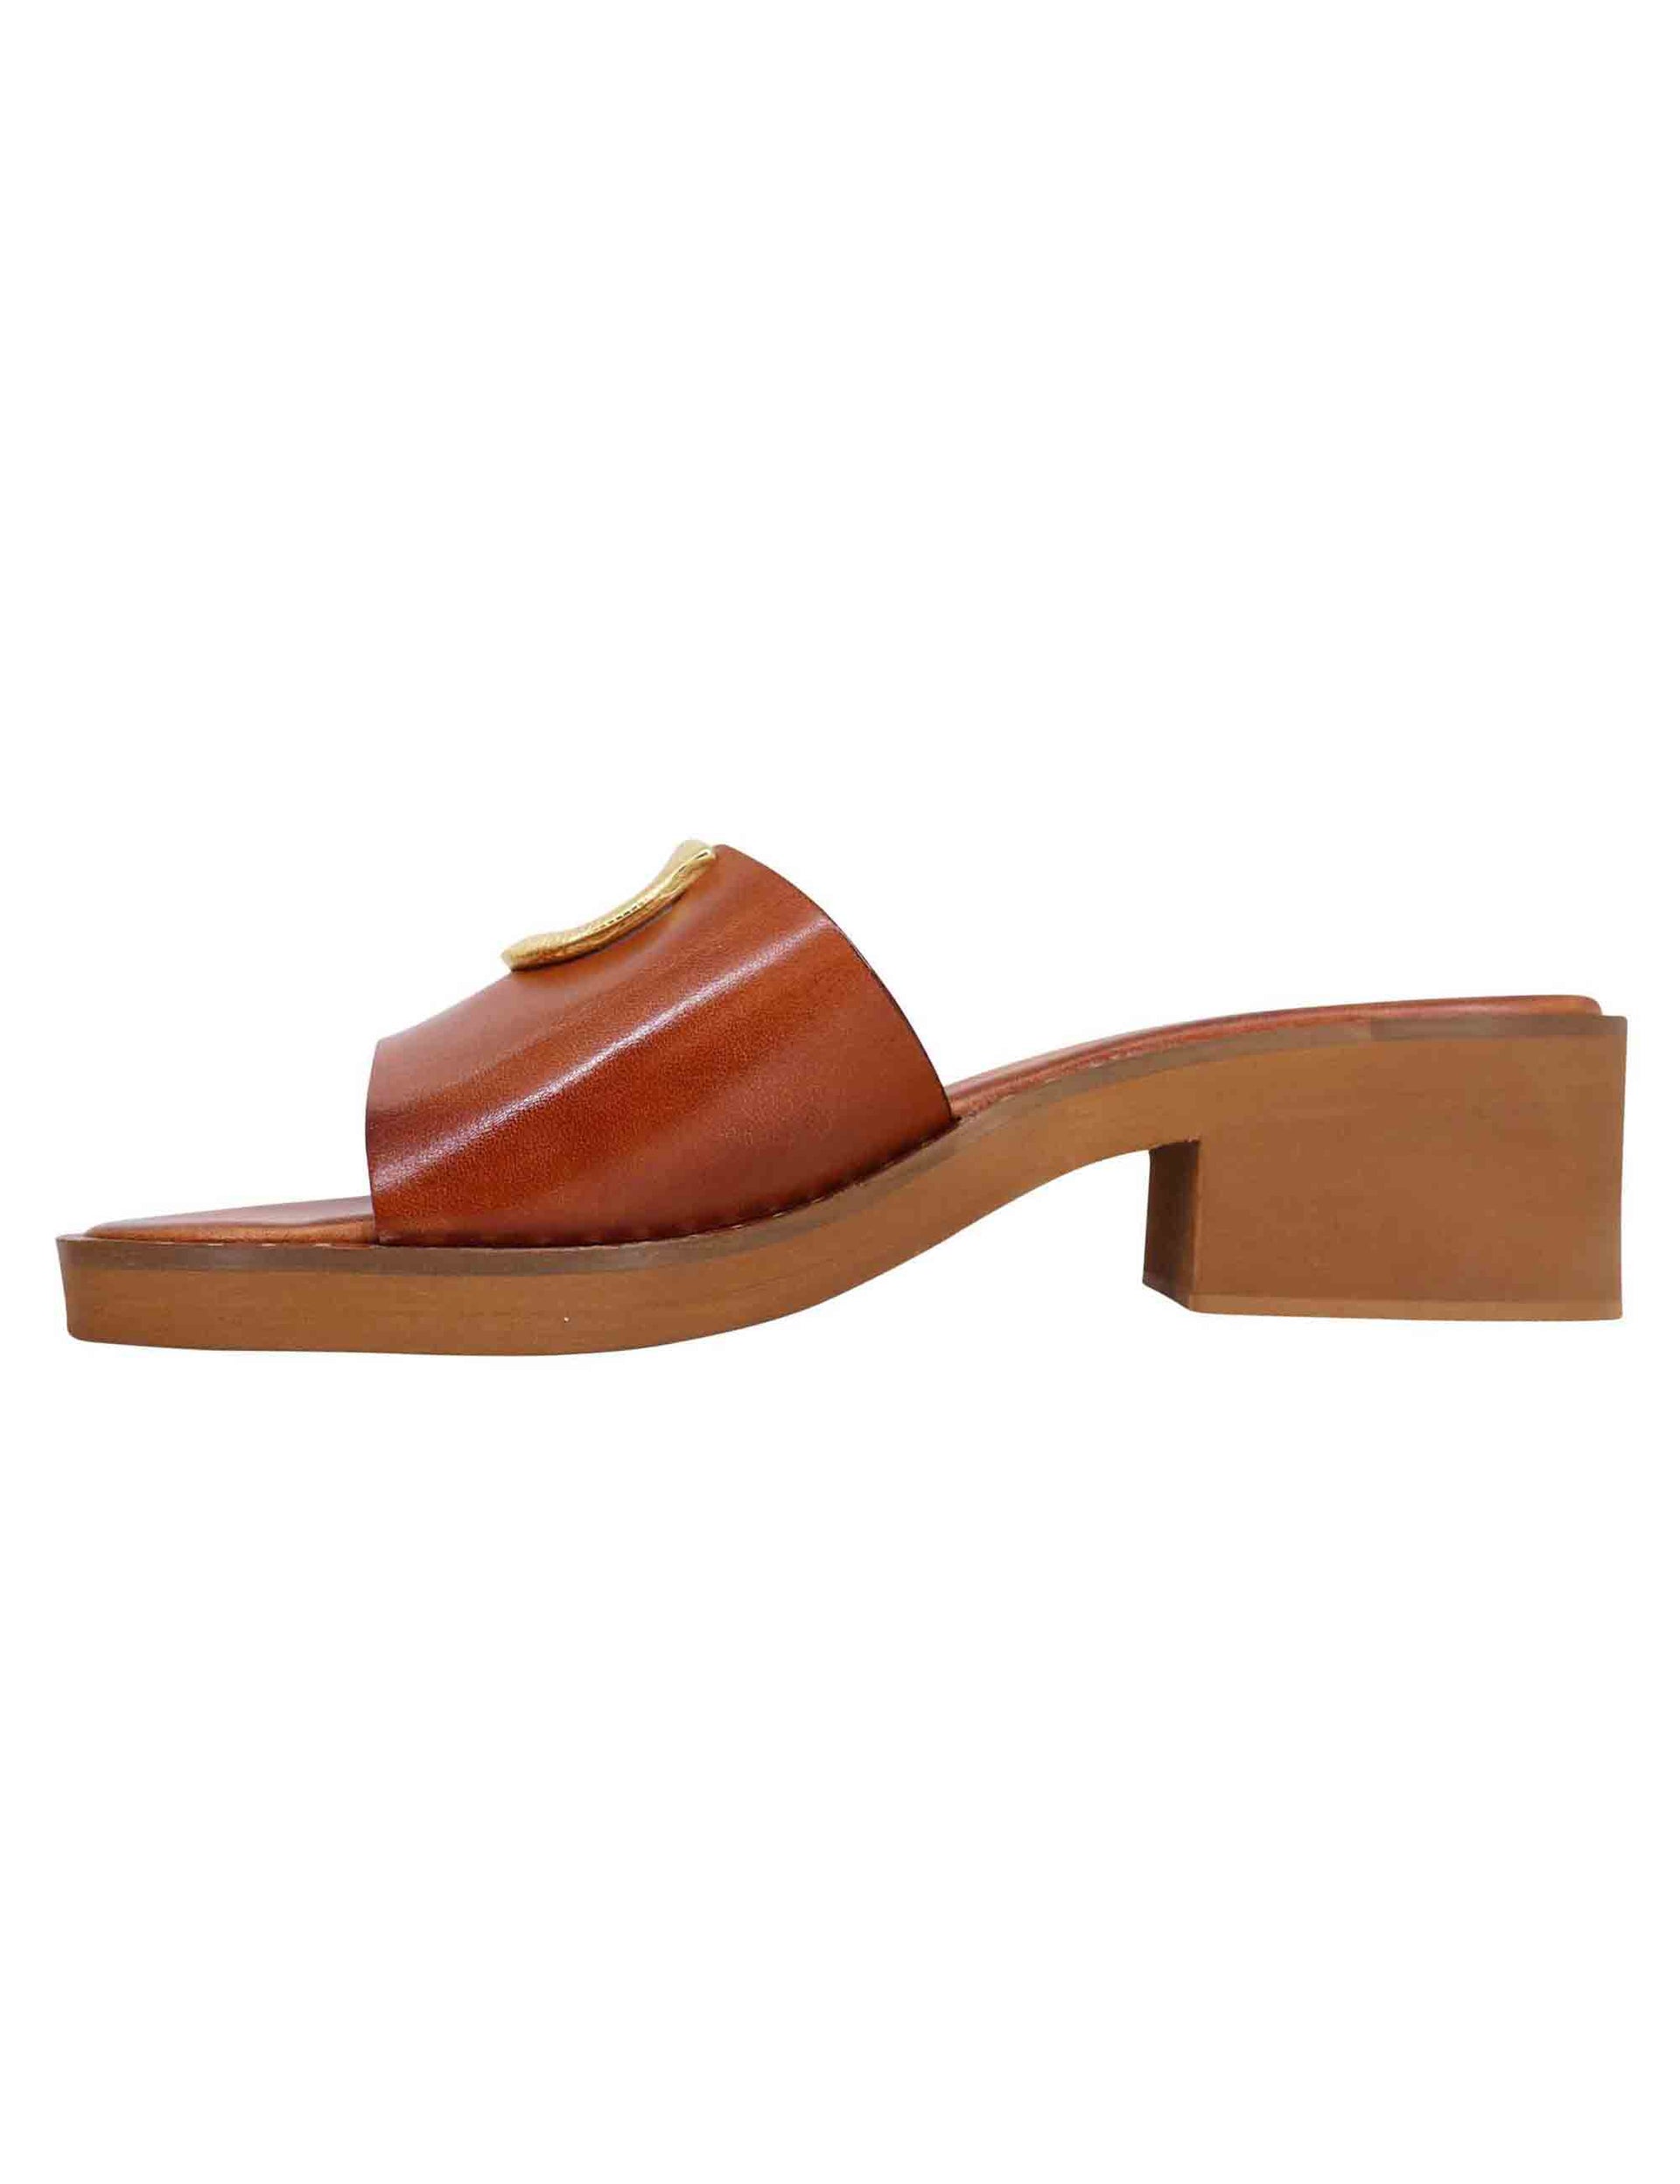 Women's sandals in tan leather with gold stud and ultra-light rubber sole